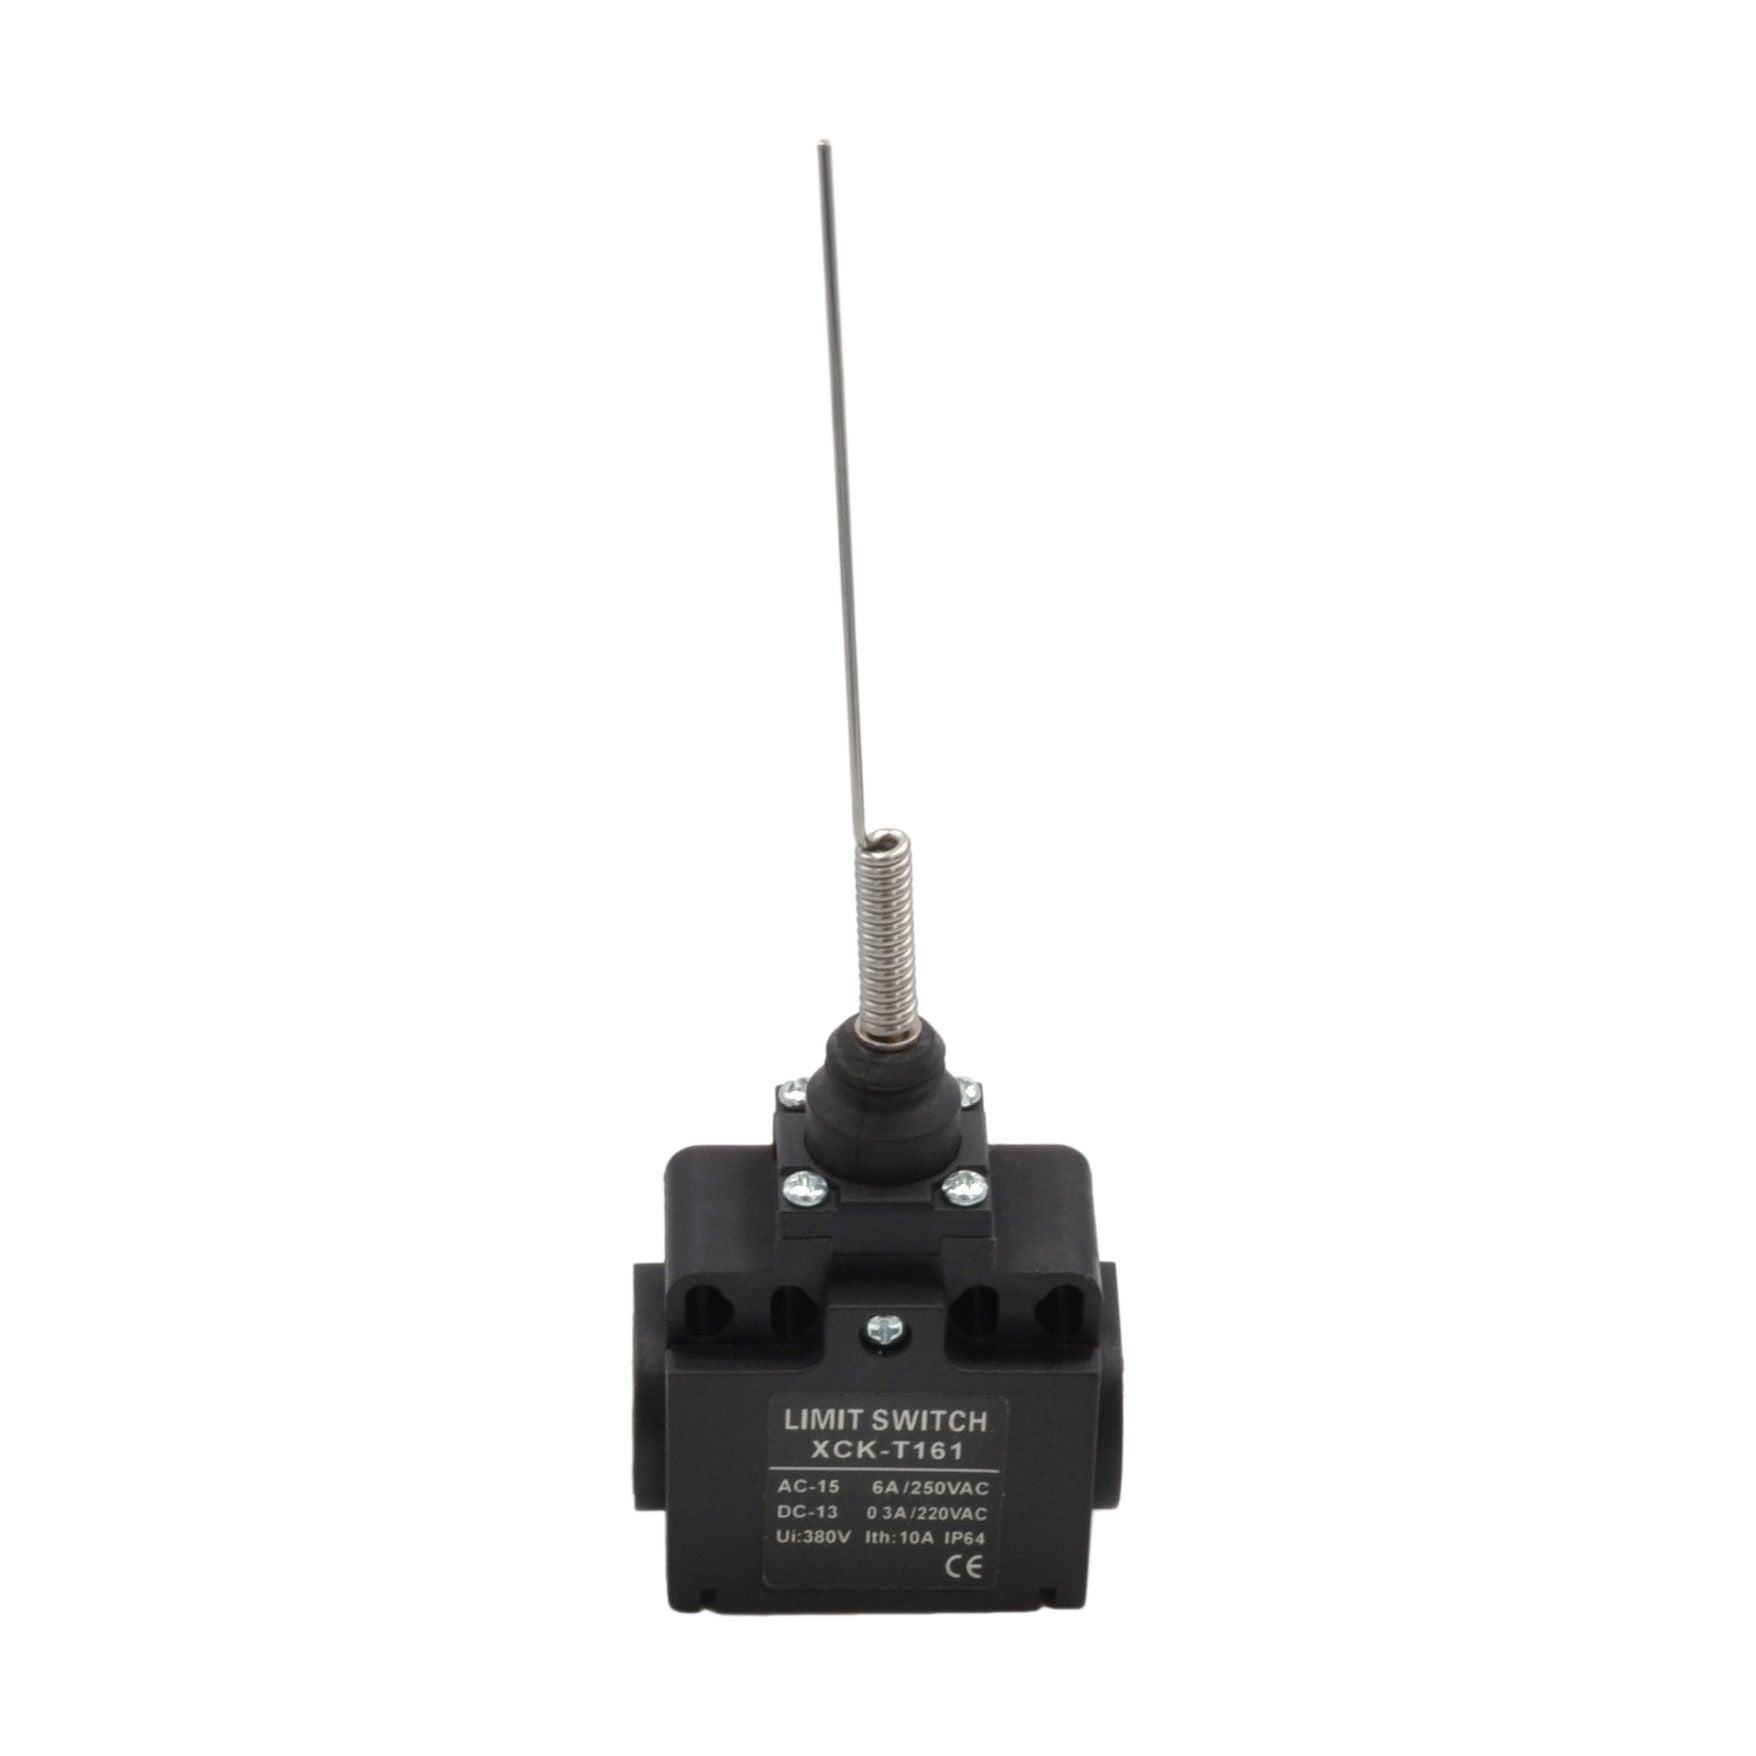 XCK-T161 Coiled Spring Contact Rod Actuator Limit Switch